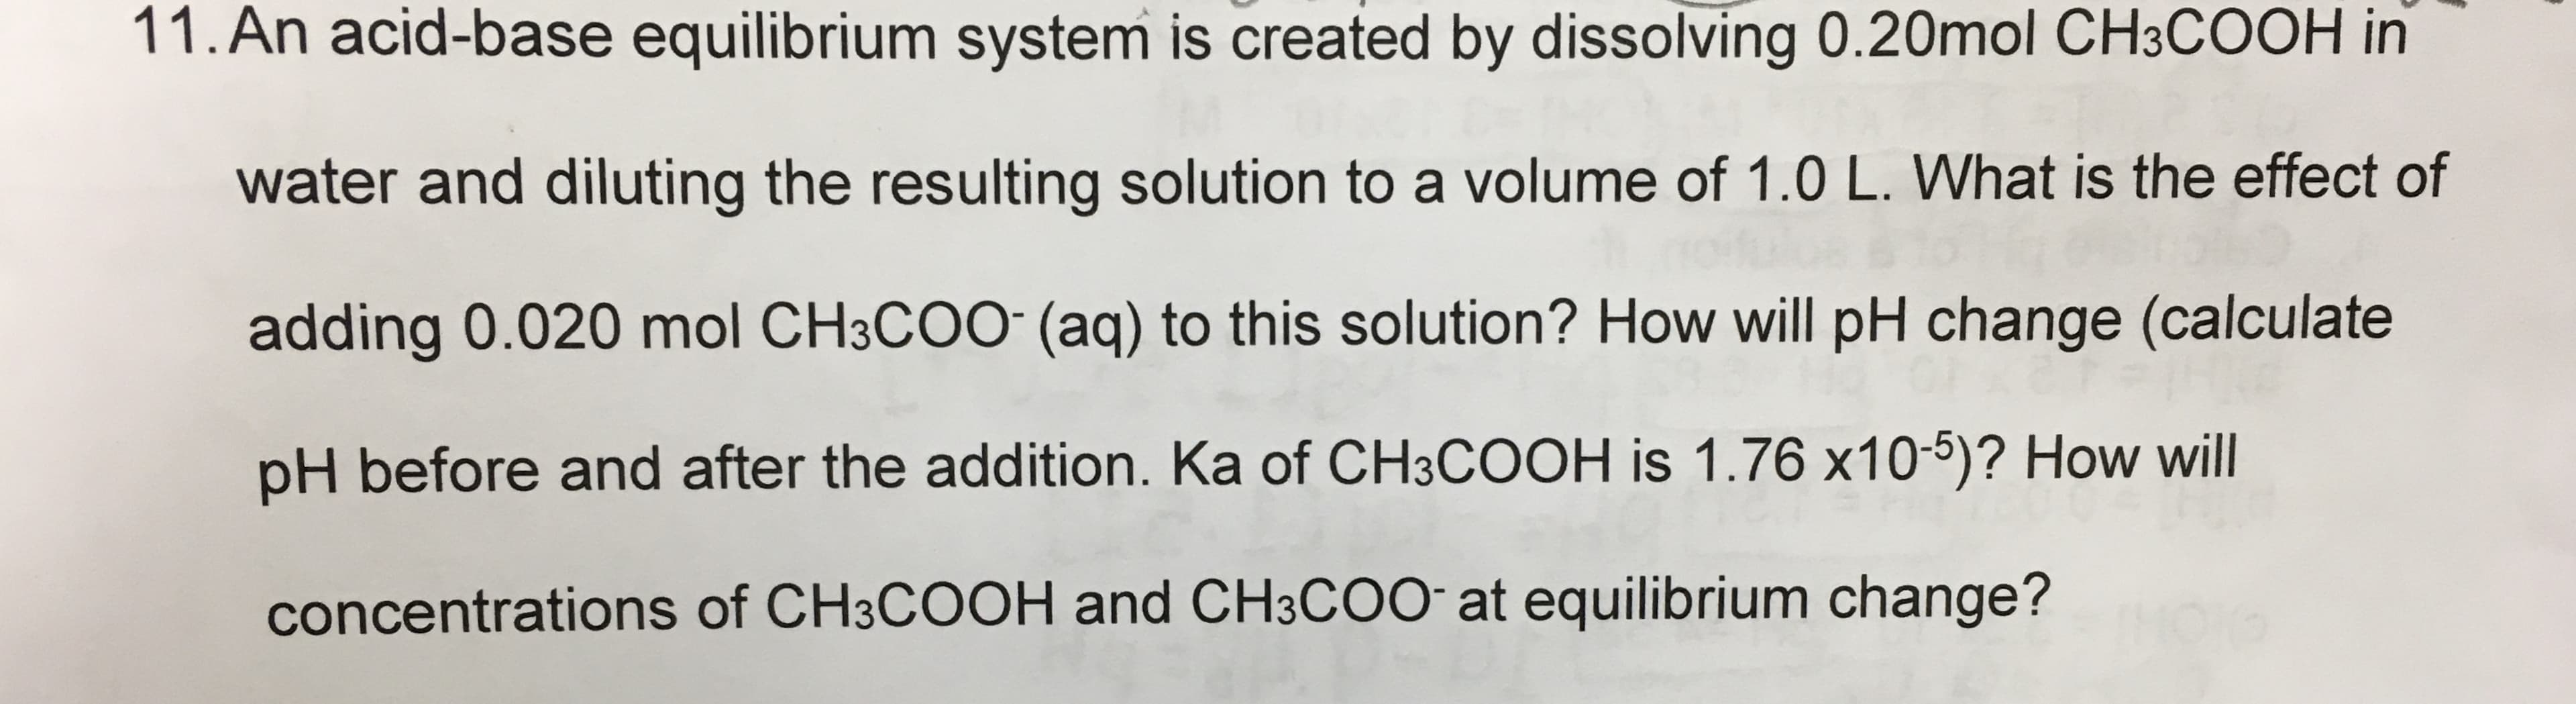 11.An acid-base equilibrium system is created by dissolving 0.20mol CH3COOH in
water and diluting the resulting solution to a volume of 1.0 L. What is the effect of
adding 0.020 mol CH3COO (aq) to this solution? How will pH change (calculate
pH before and after the addition. Ka of CH3COOH is 1.76 x10-5)? How will
concentrations of CH3COOH and CH3COO at equilibrium change?
